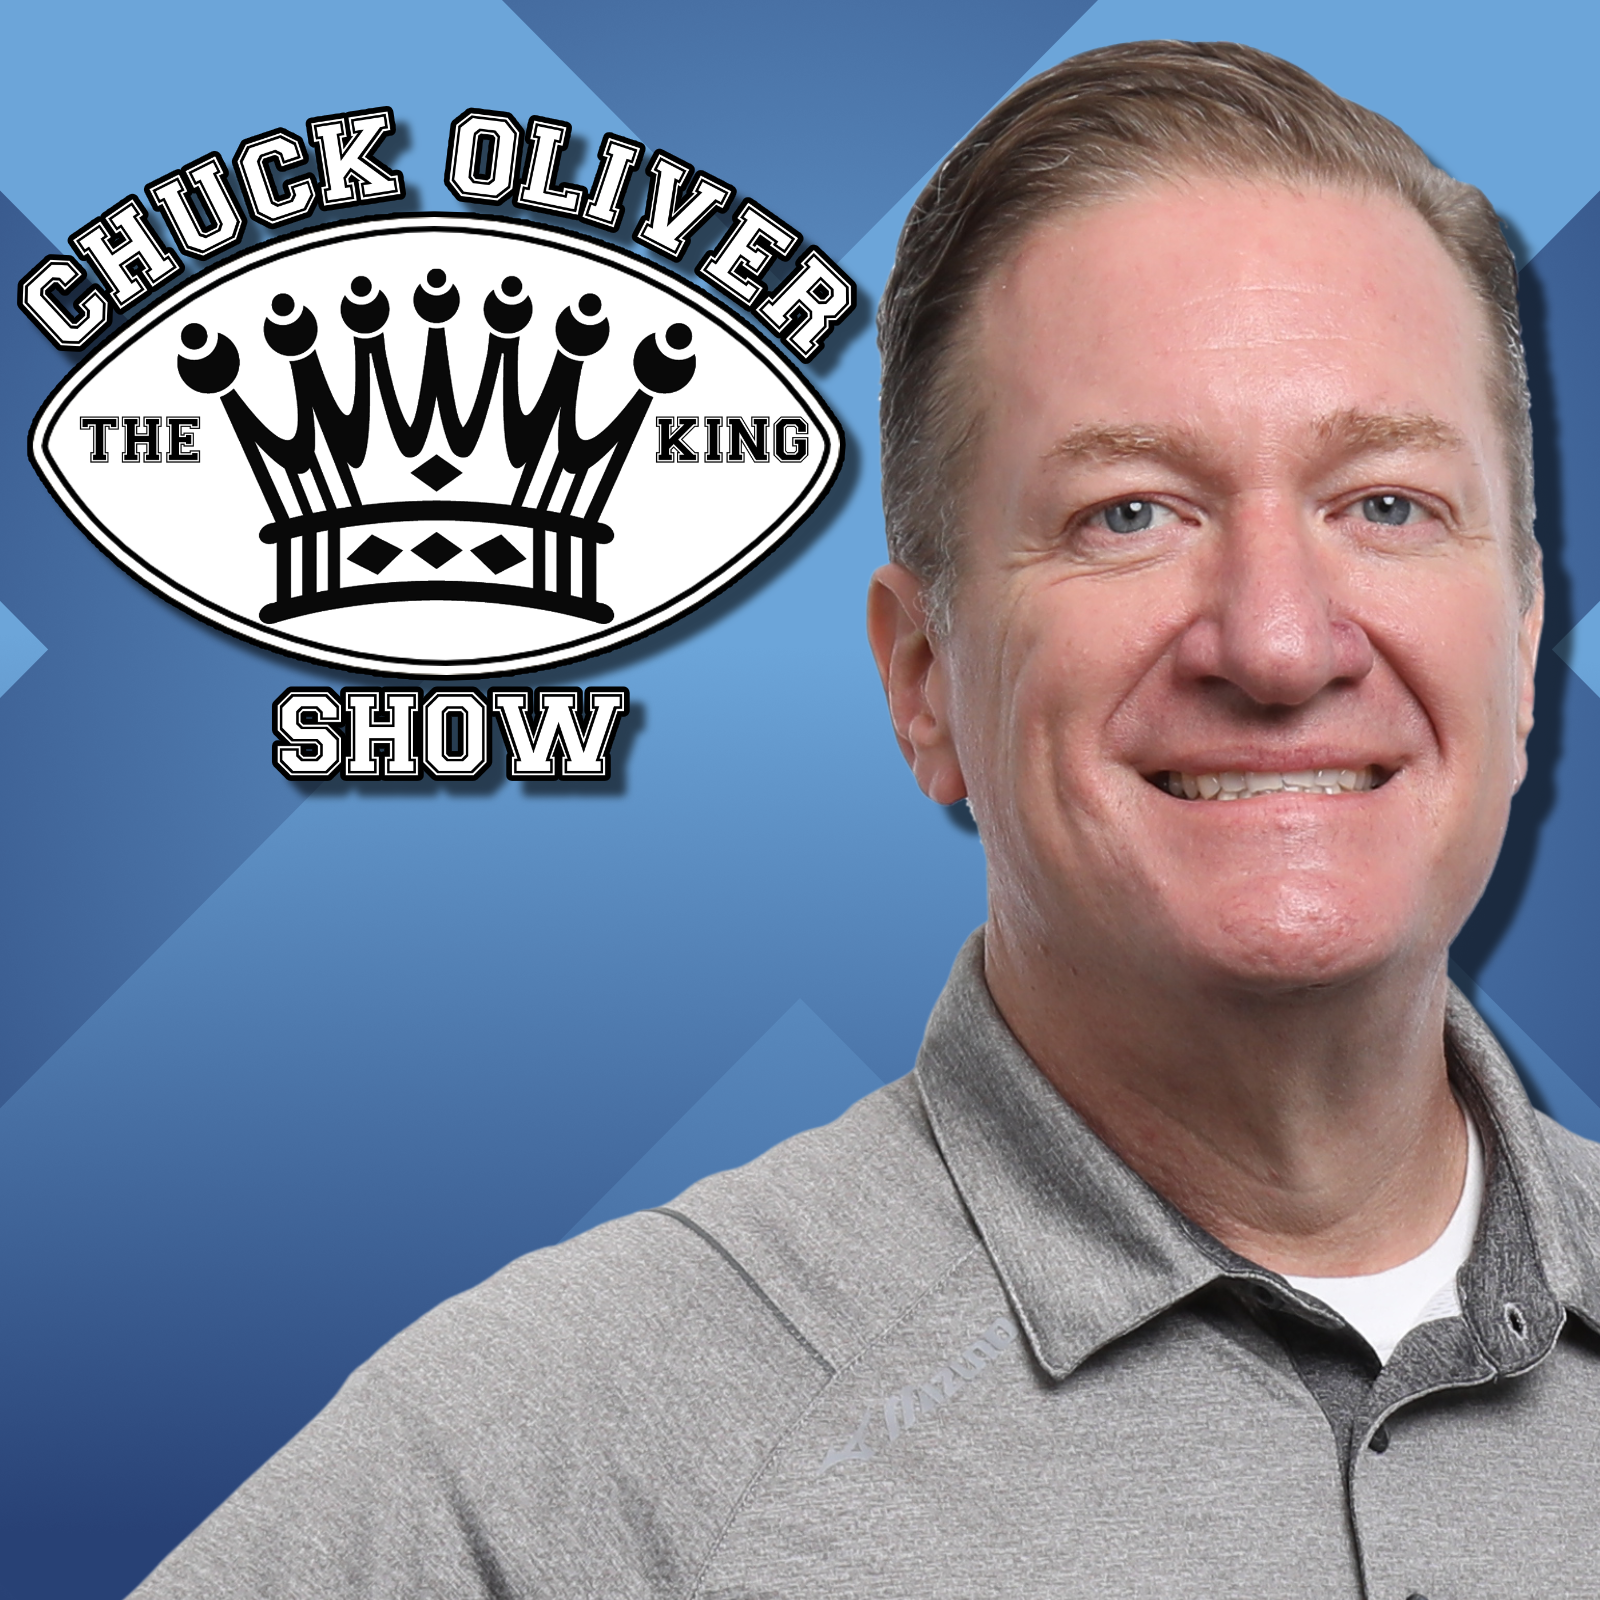 CHUCK OLIVER SHOW 4-12 FRIDAY HOUR 1